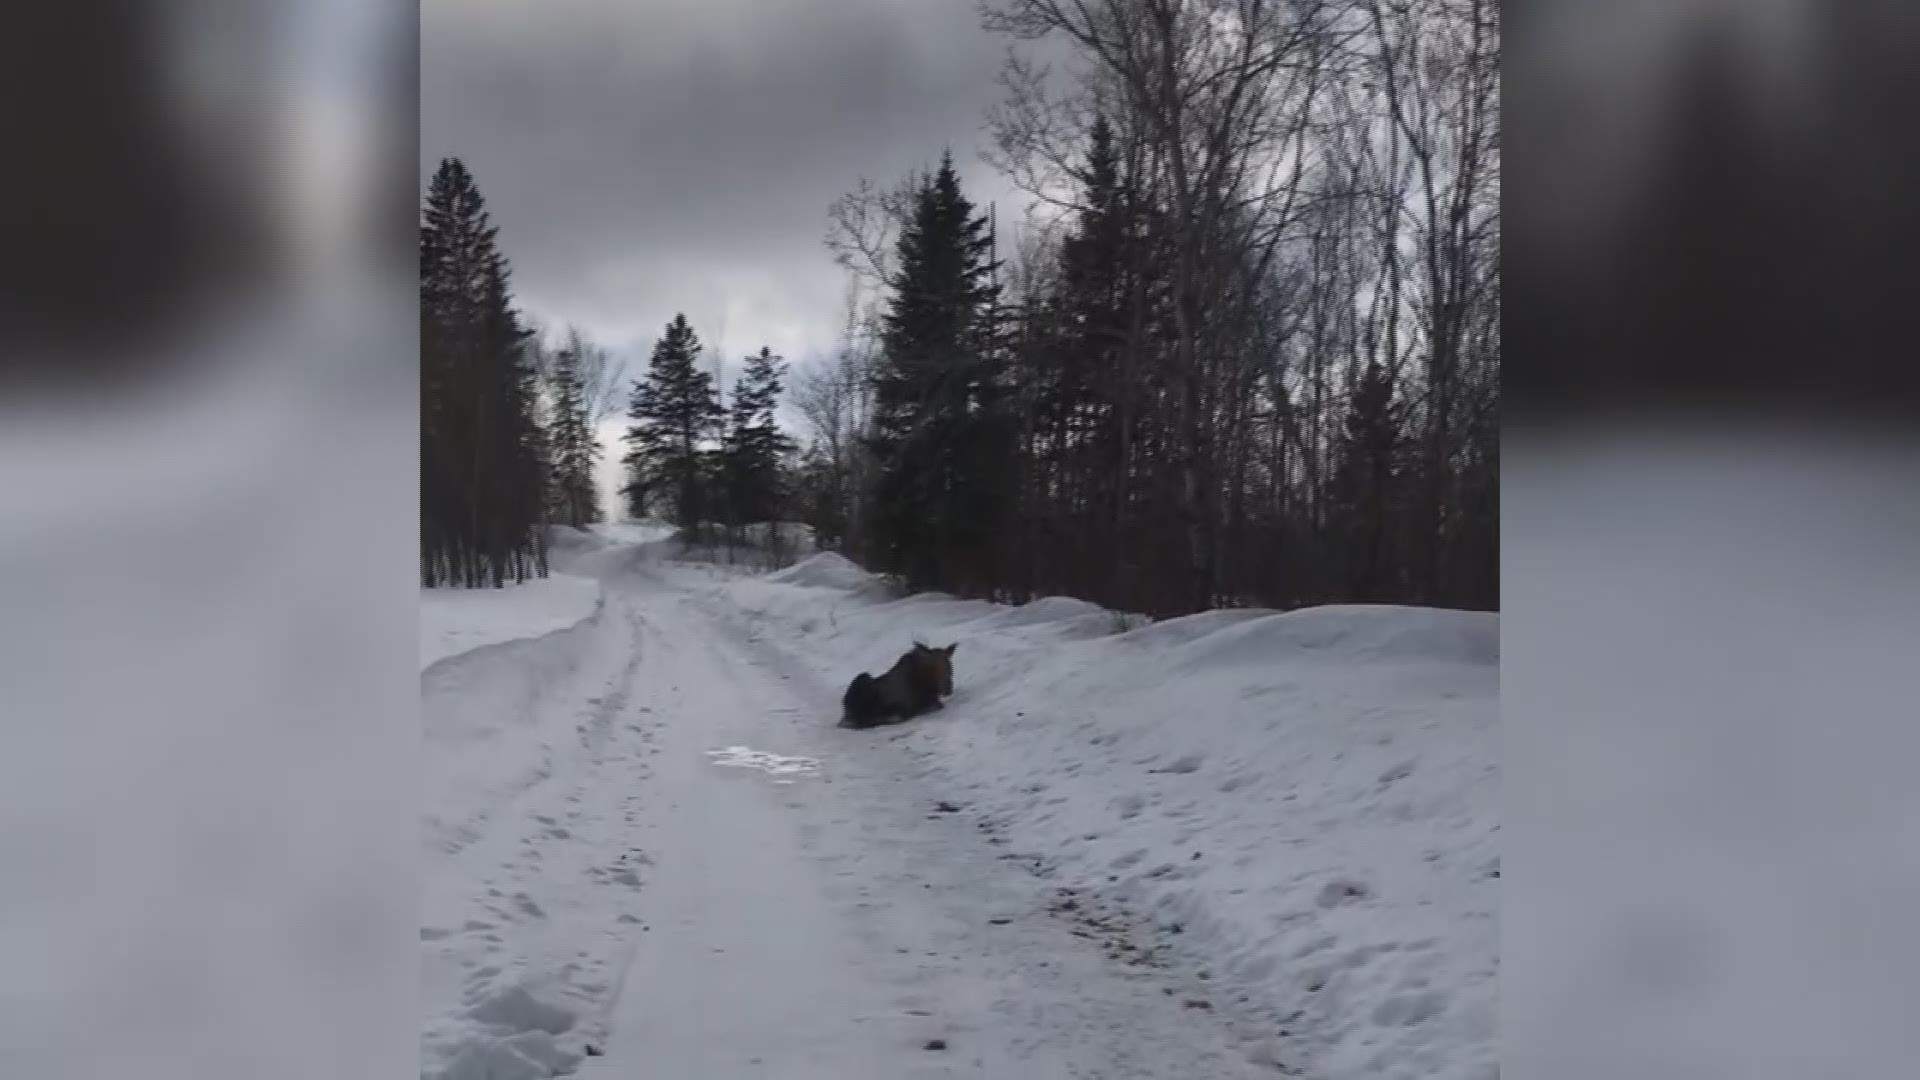 Joey Ouellette got charged by a young moose he thought was sick or injured, nearly escaping its path and capturing it on video.